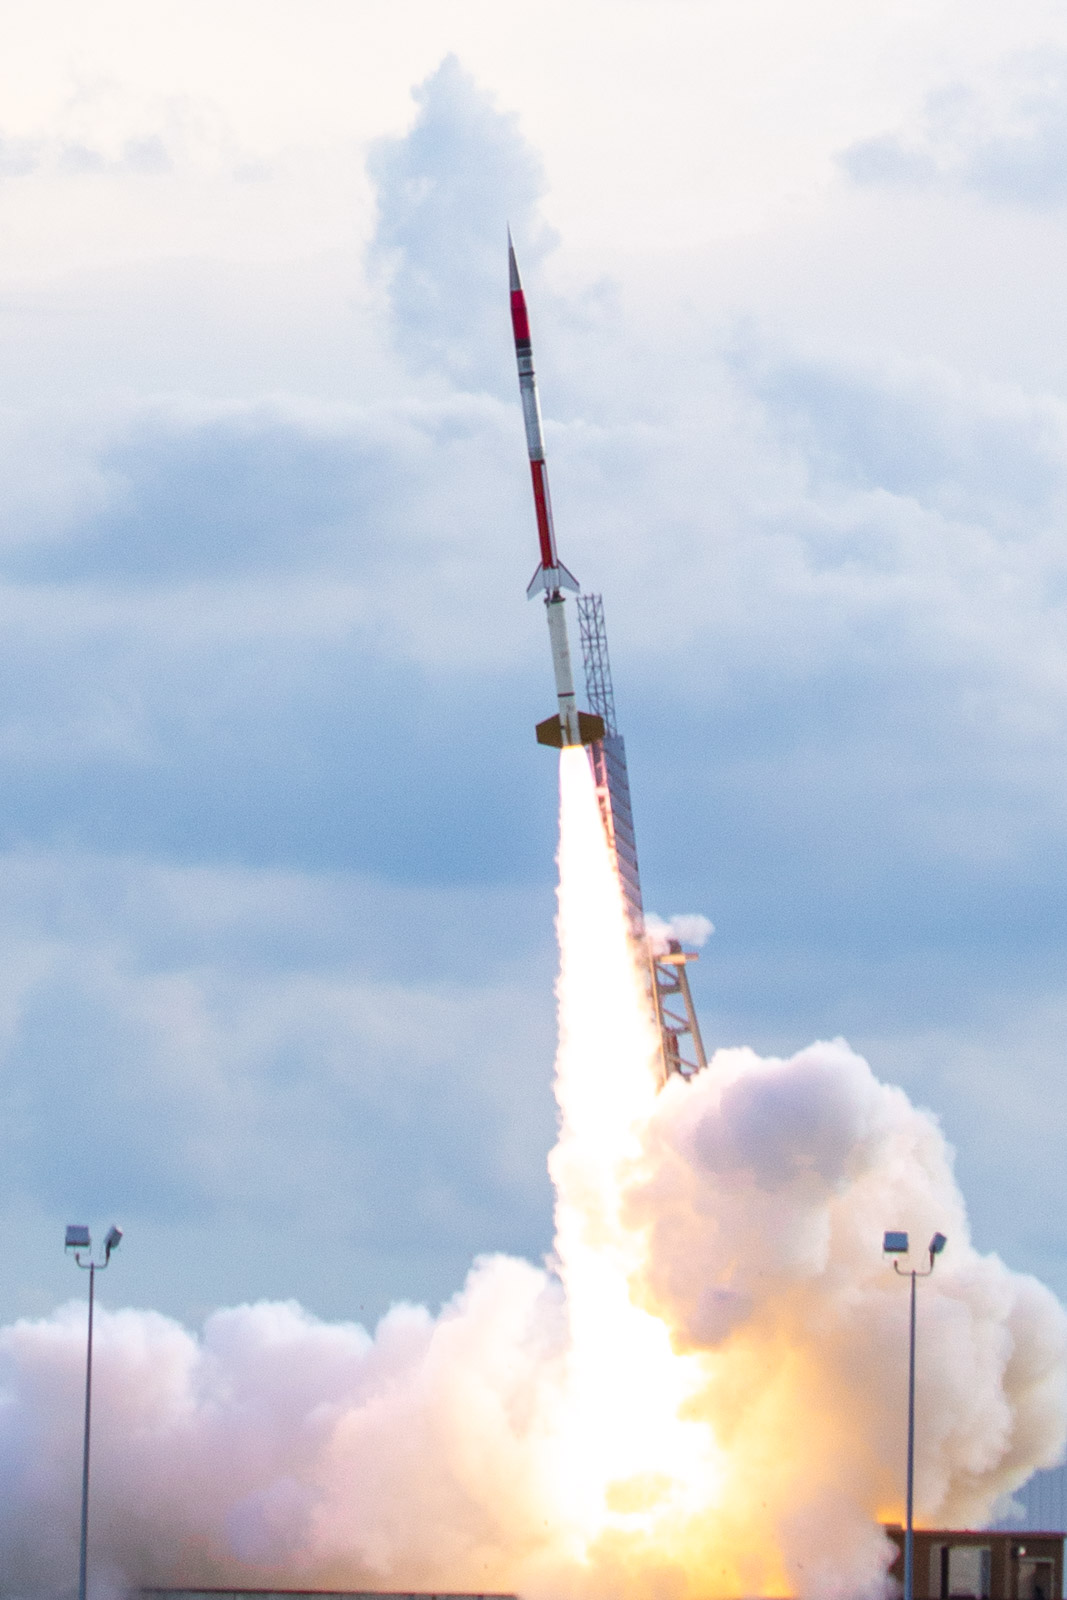 NASA's suborbital sounding rocket carries student experiments to space